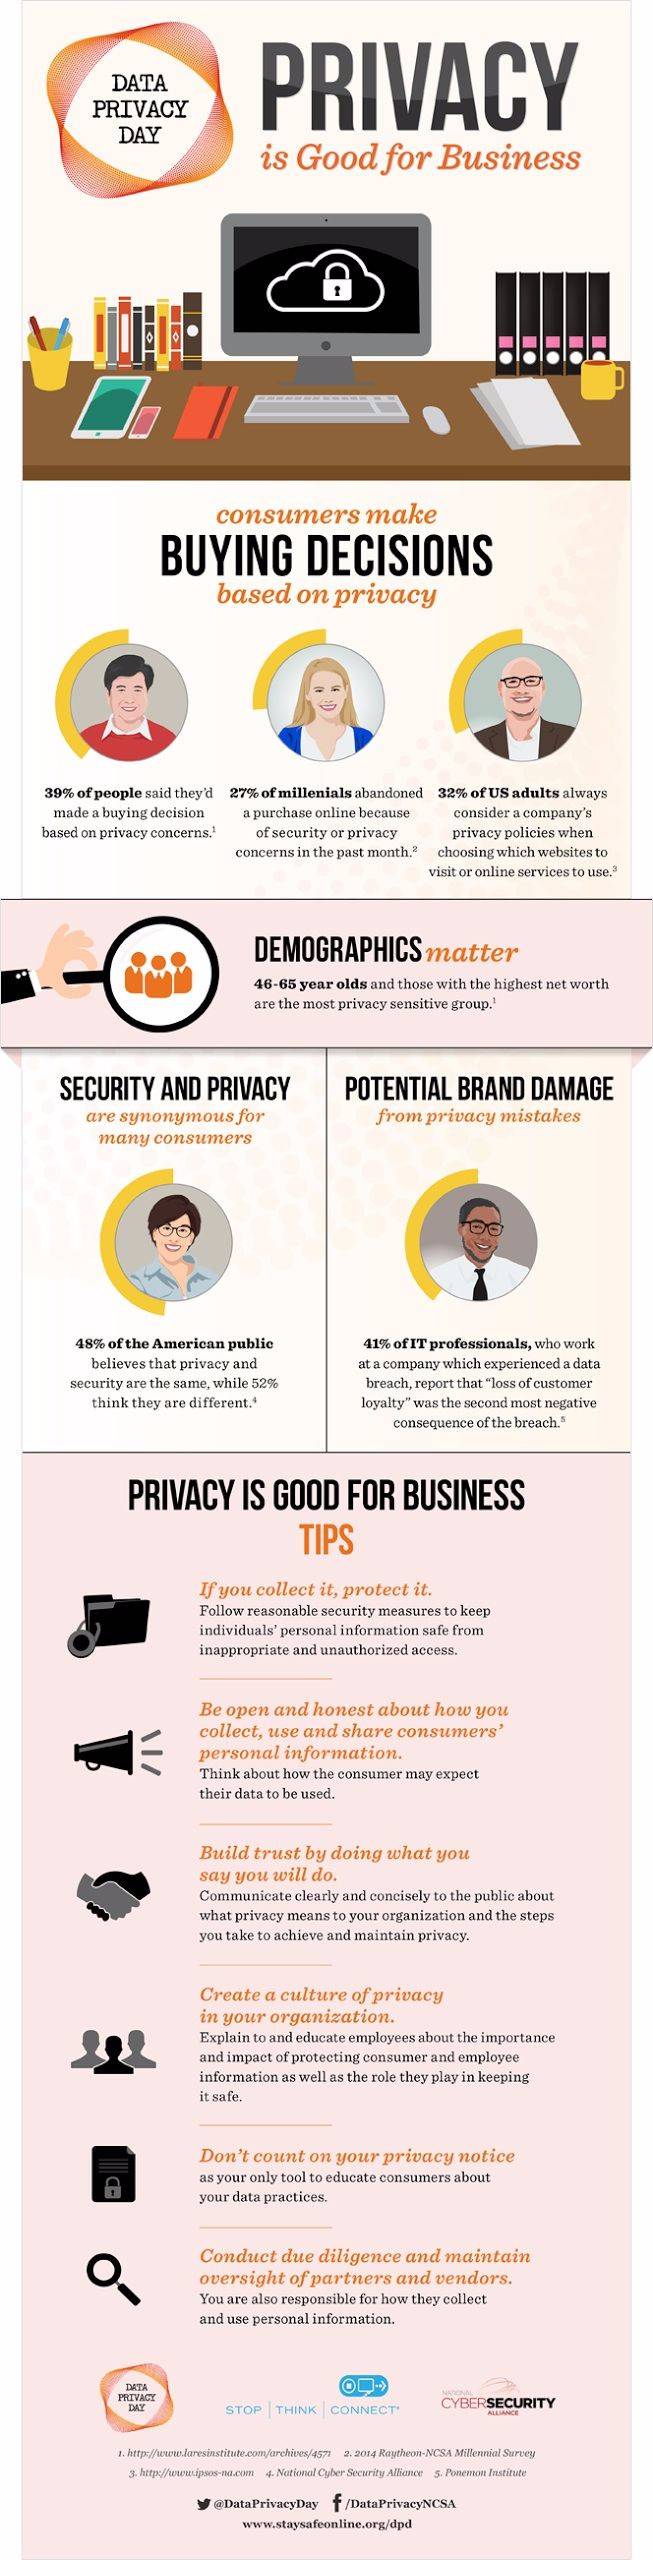 Data privacy infographic